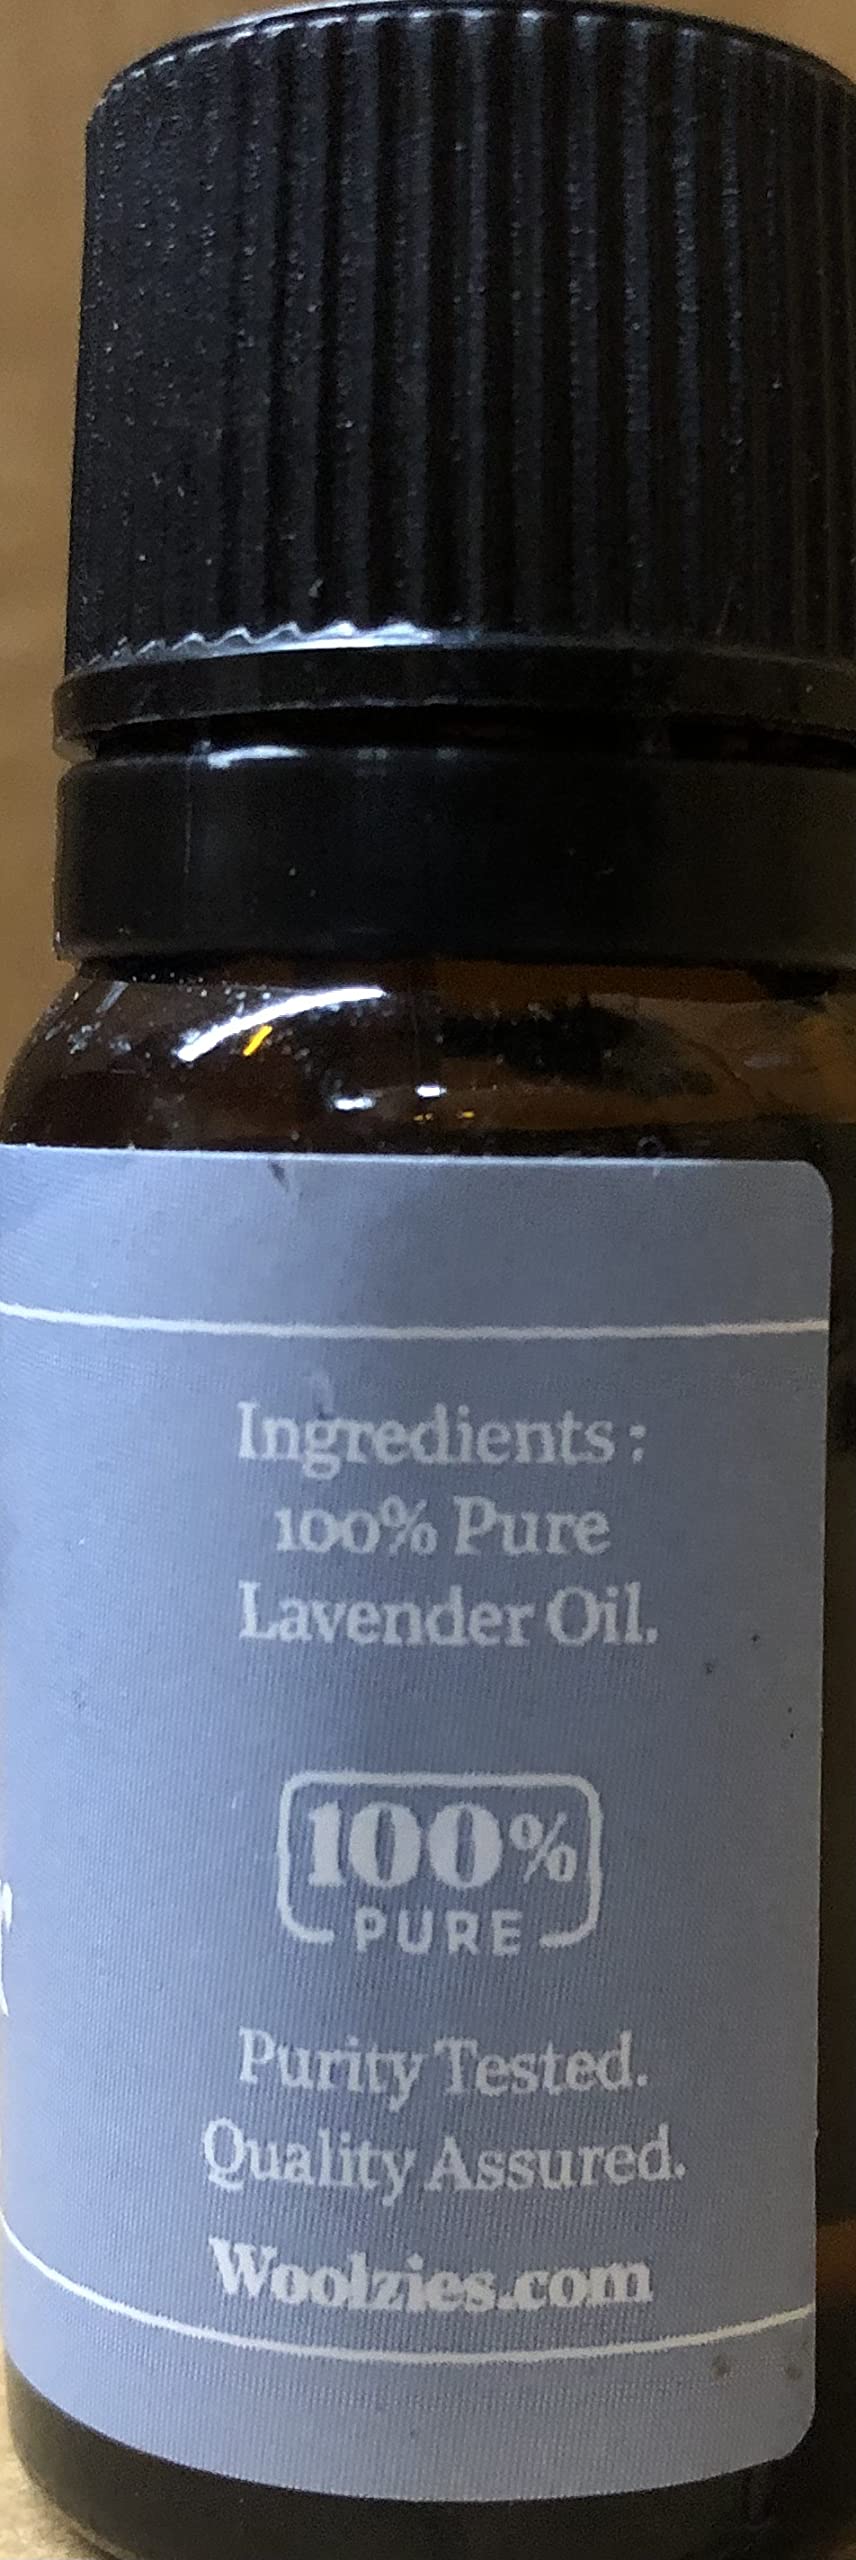 Woolzies Lavender Essential Oil - Aromatherapy Essential Oils for Diffuser and Topical Use | 100% Pure Therapeutic Grade Lavender |1 Fl Oz